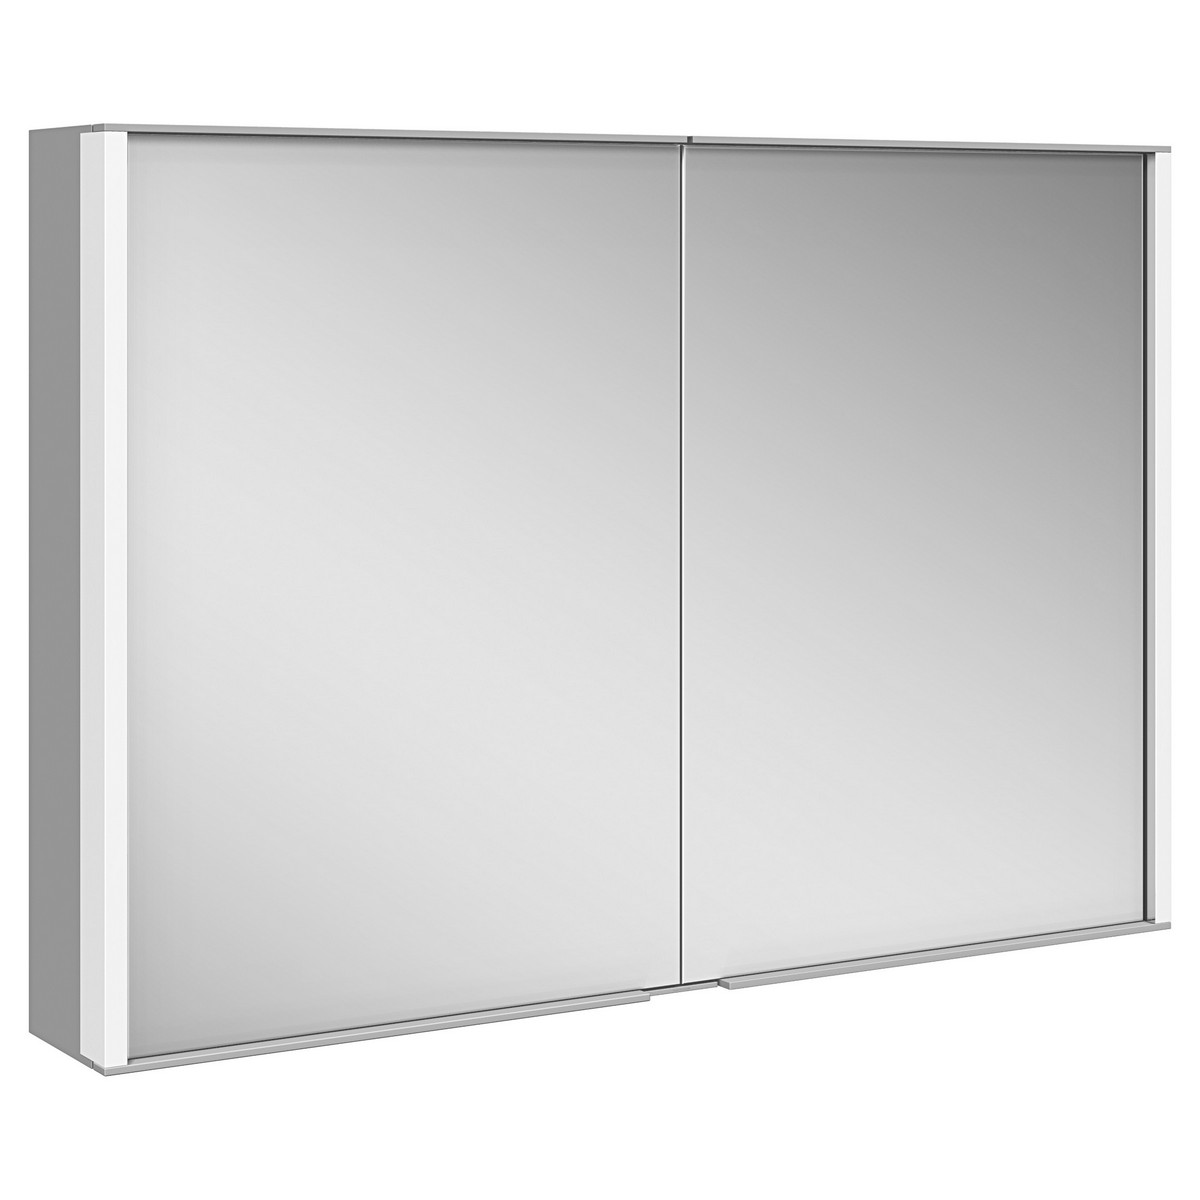 KEUCO 12803171351 ROYAL MATCH 39 3/8 W X 6 1/4 D X 27 1/2 H INCH 2-DOOR 3000K LED WALL MOUNTED MIRROR MEDICINE CABINET IN ALUMINUM